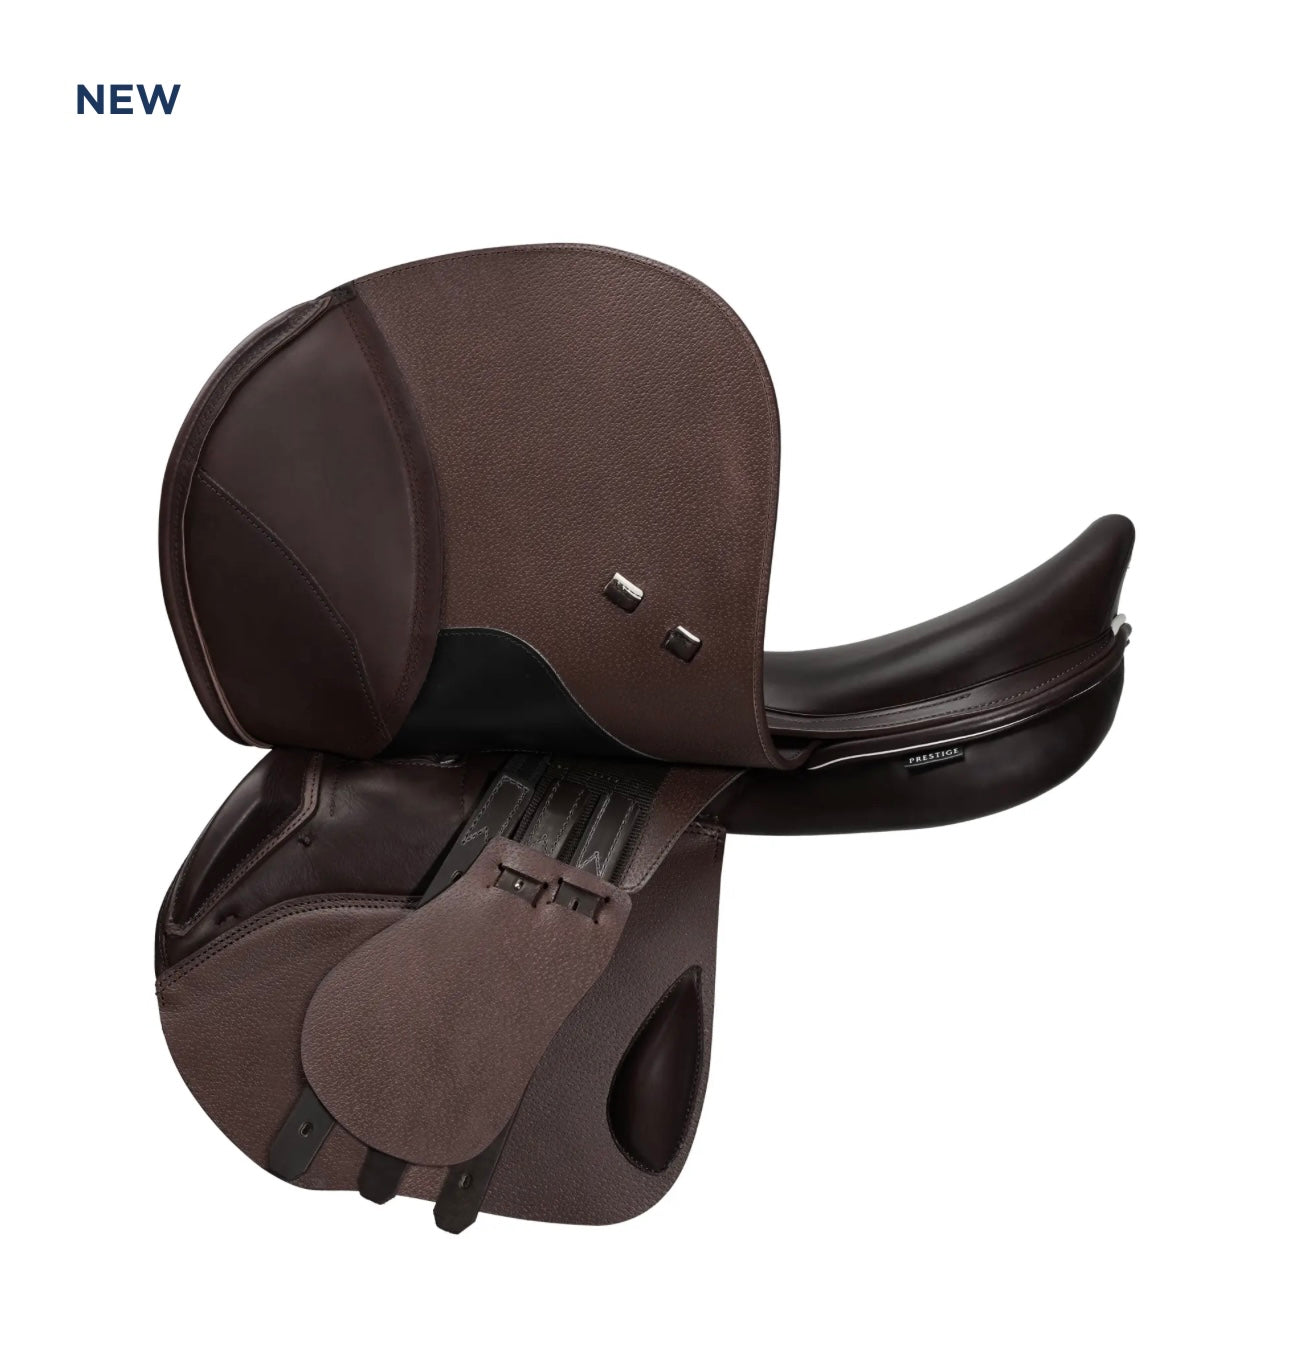 Prestige Rubino MD AS-X Jumping Saddle NEW TO THE MARKET